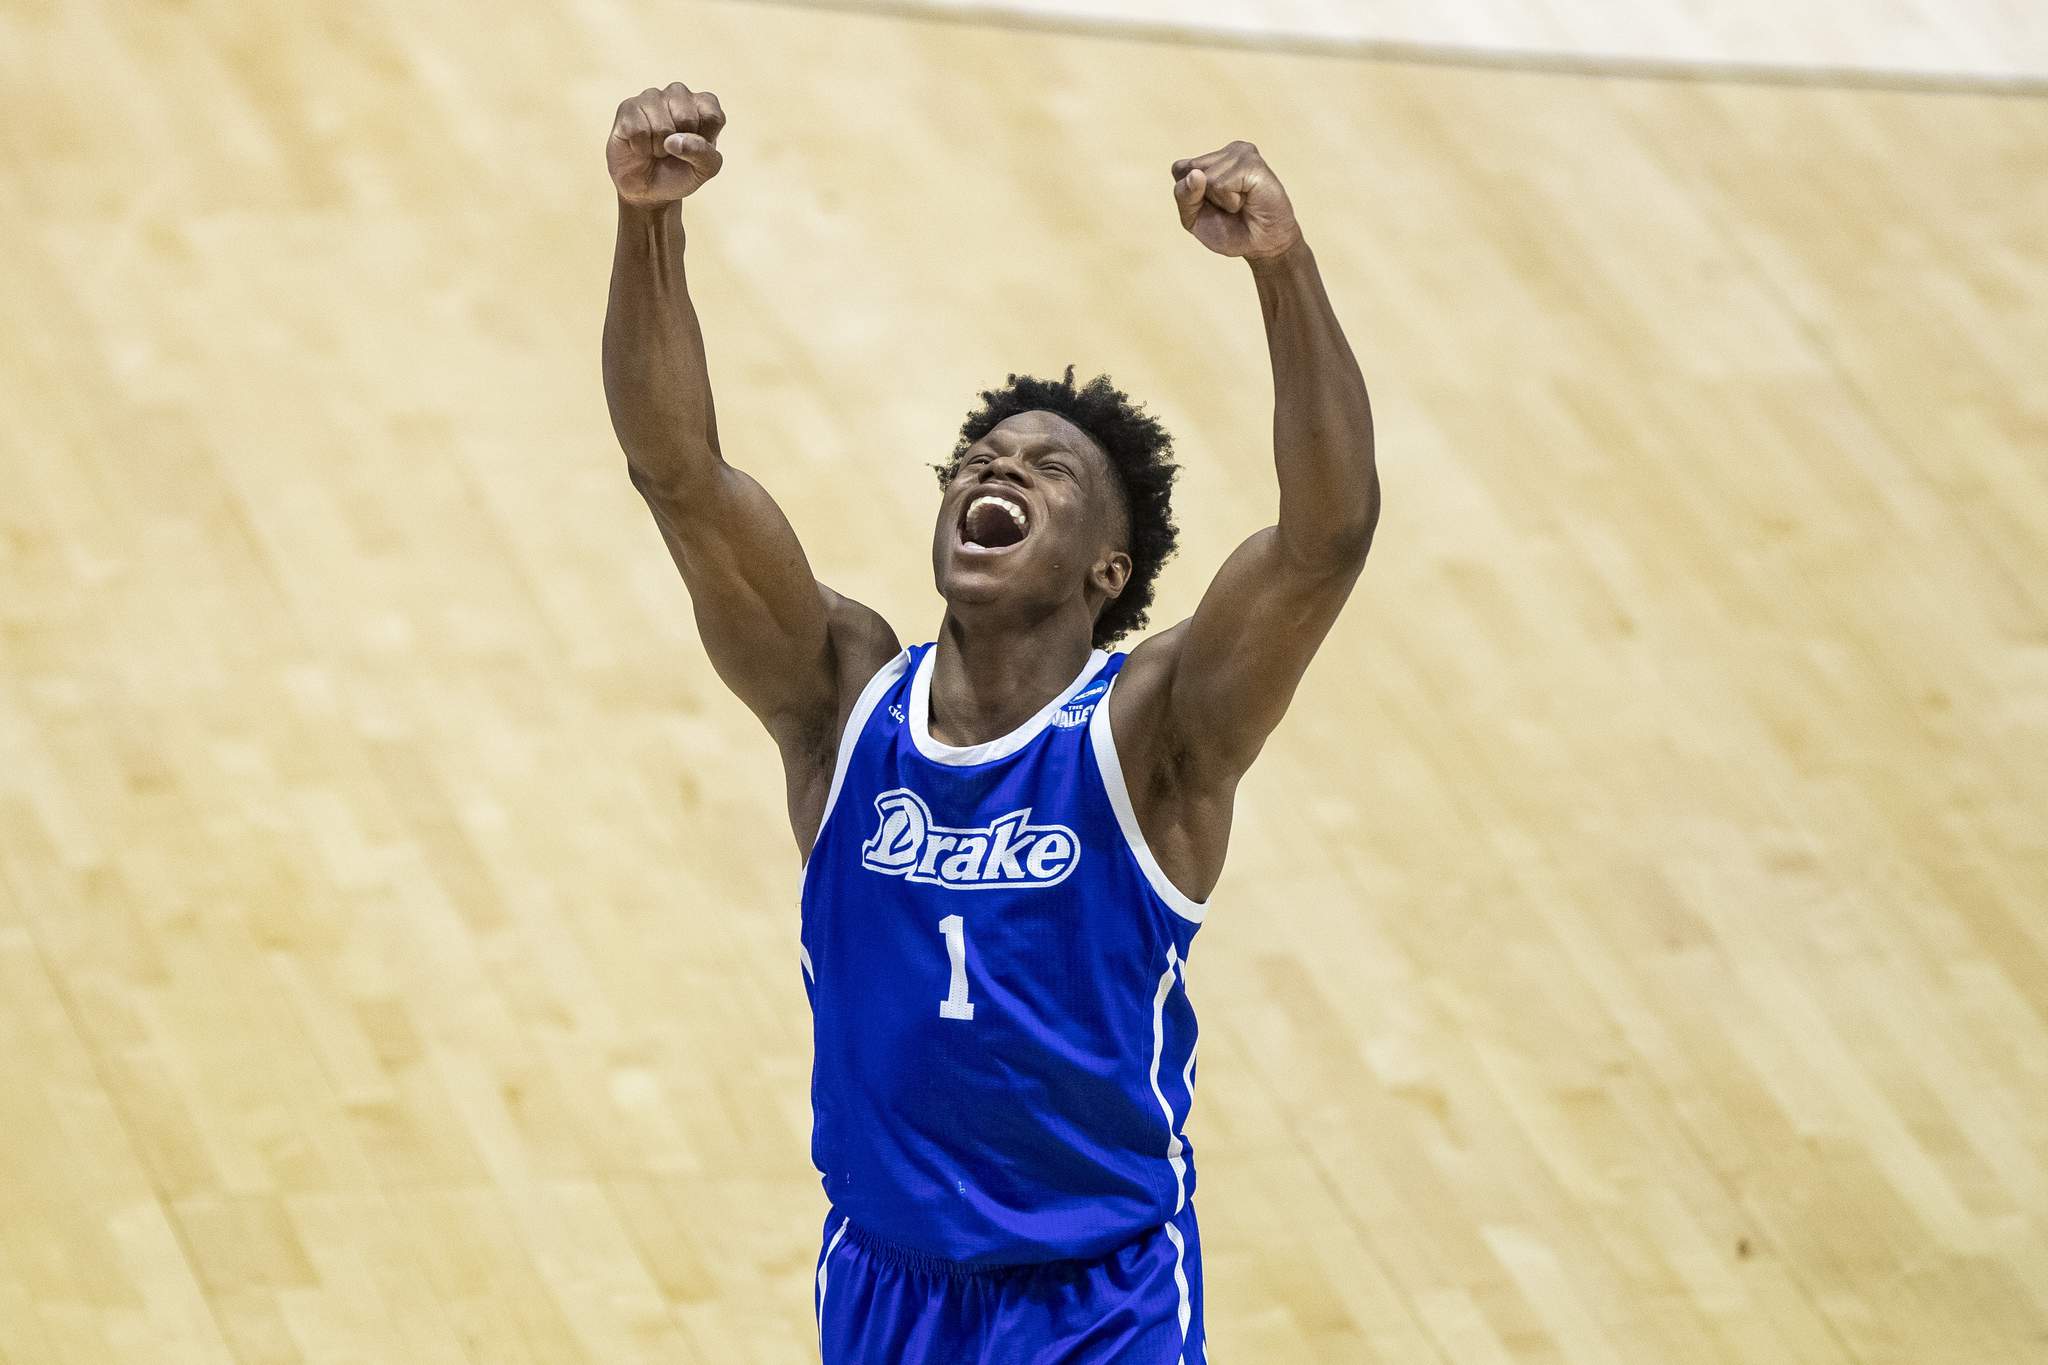 Drake tops Wichita State for first NCAA win in 50 years